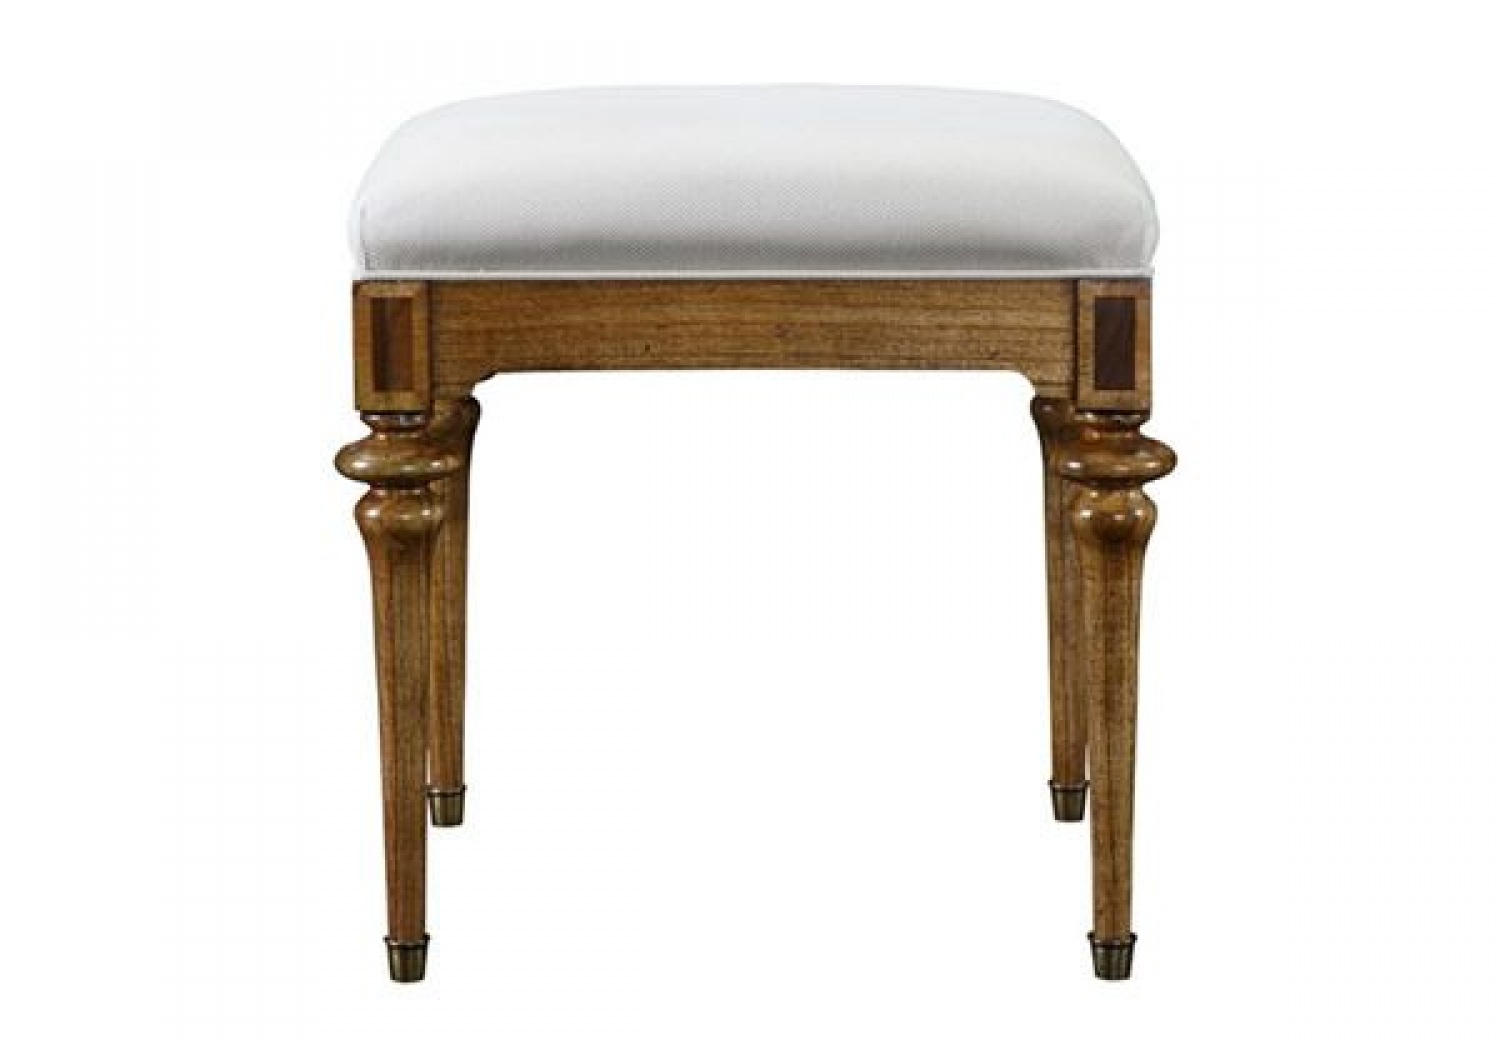 frank hudson spire stool, Beds and Mattresses Sotogrande, Storage bed base, bedrooms decoration, Ikea sizes beds and mattresses, nueva andalucia, delivery spain image